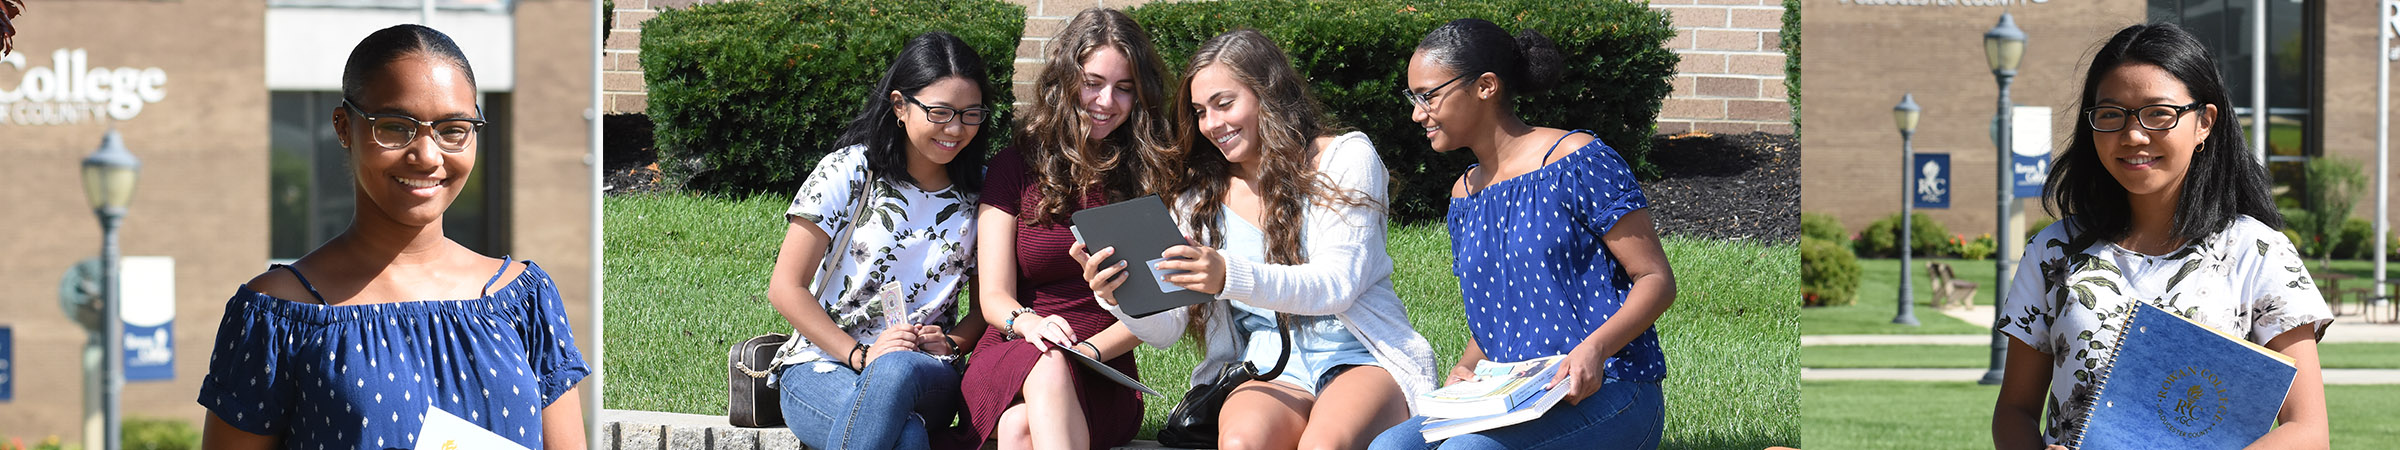 Students looking at an iPad on campus